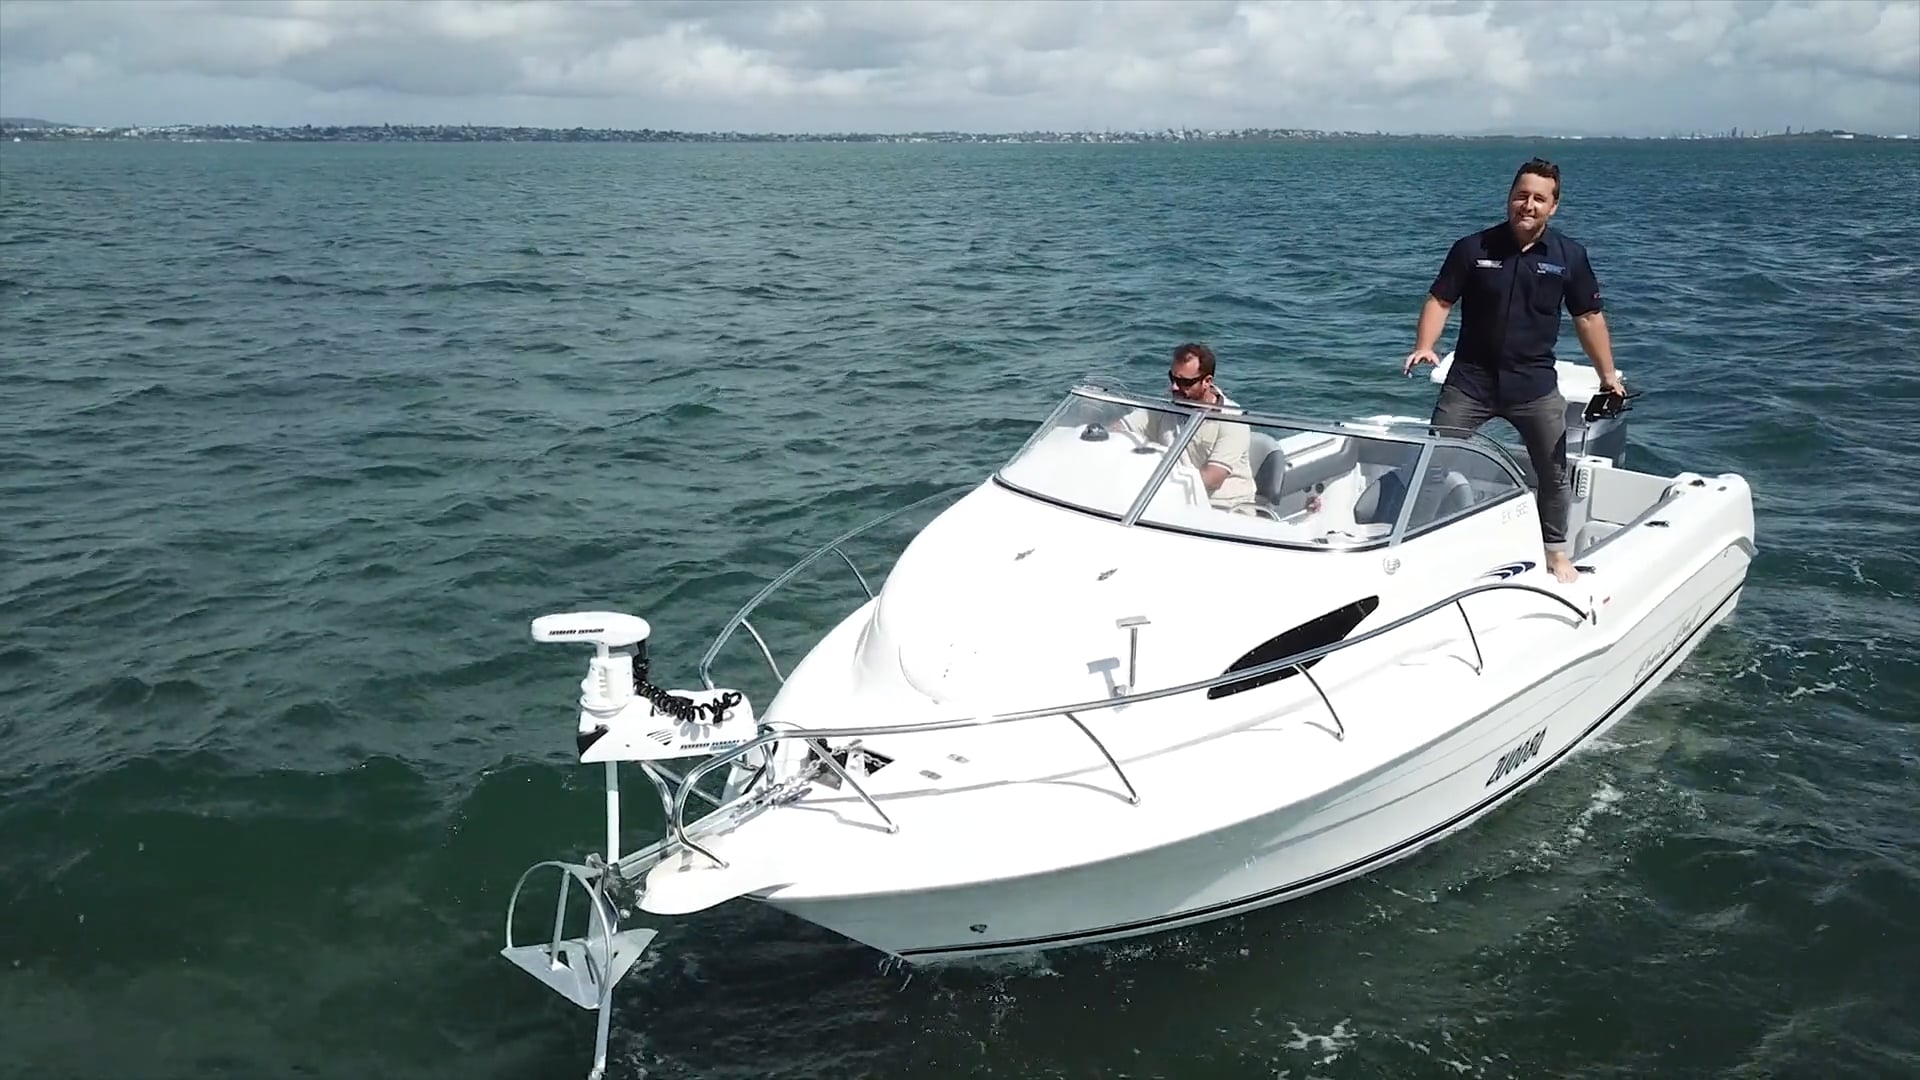 CRUISE CRAFT - WATERTESTING THE FIRST 'FACTORY FIT' MINN KOTO ELECTRIC BOW MOUNT MOTOR